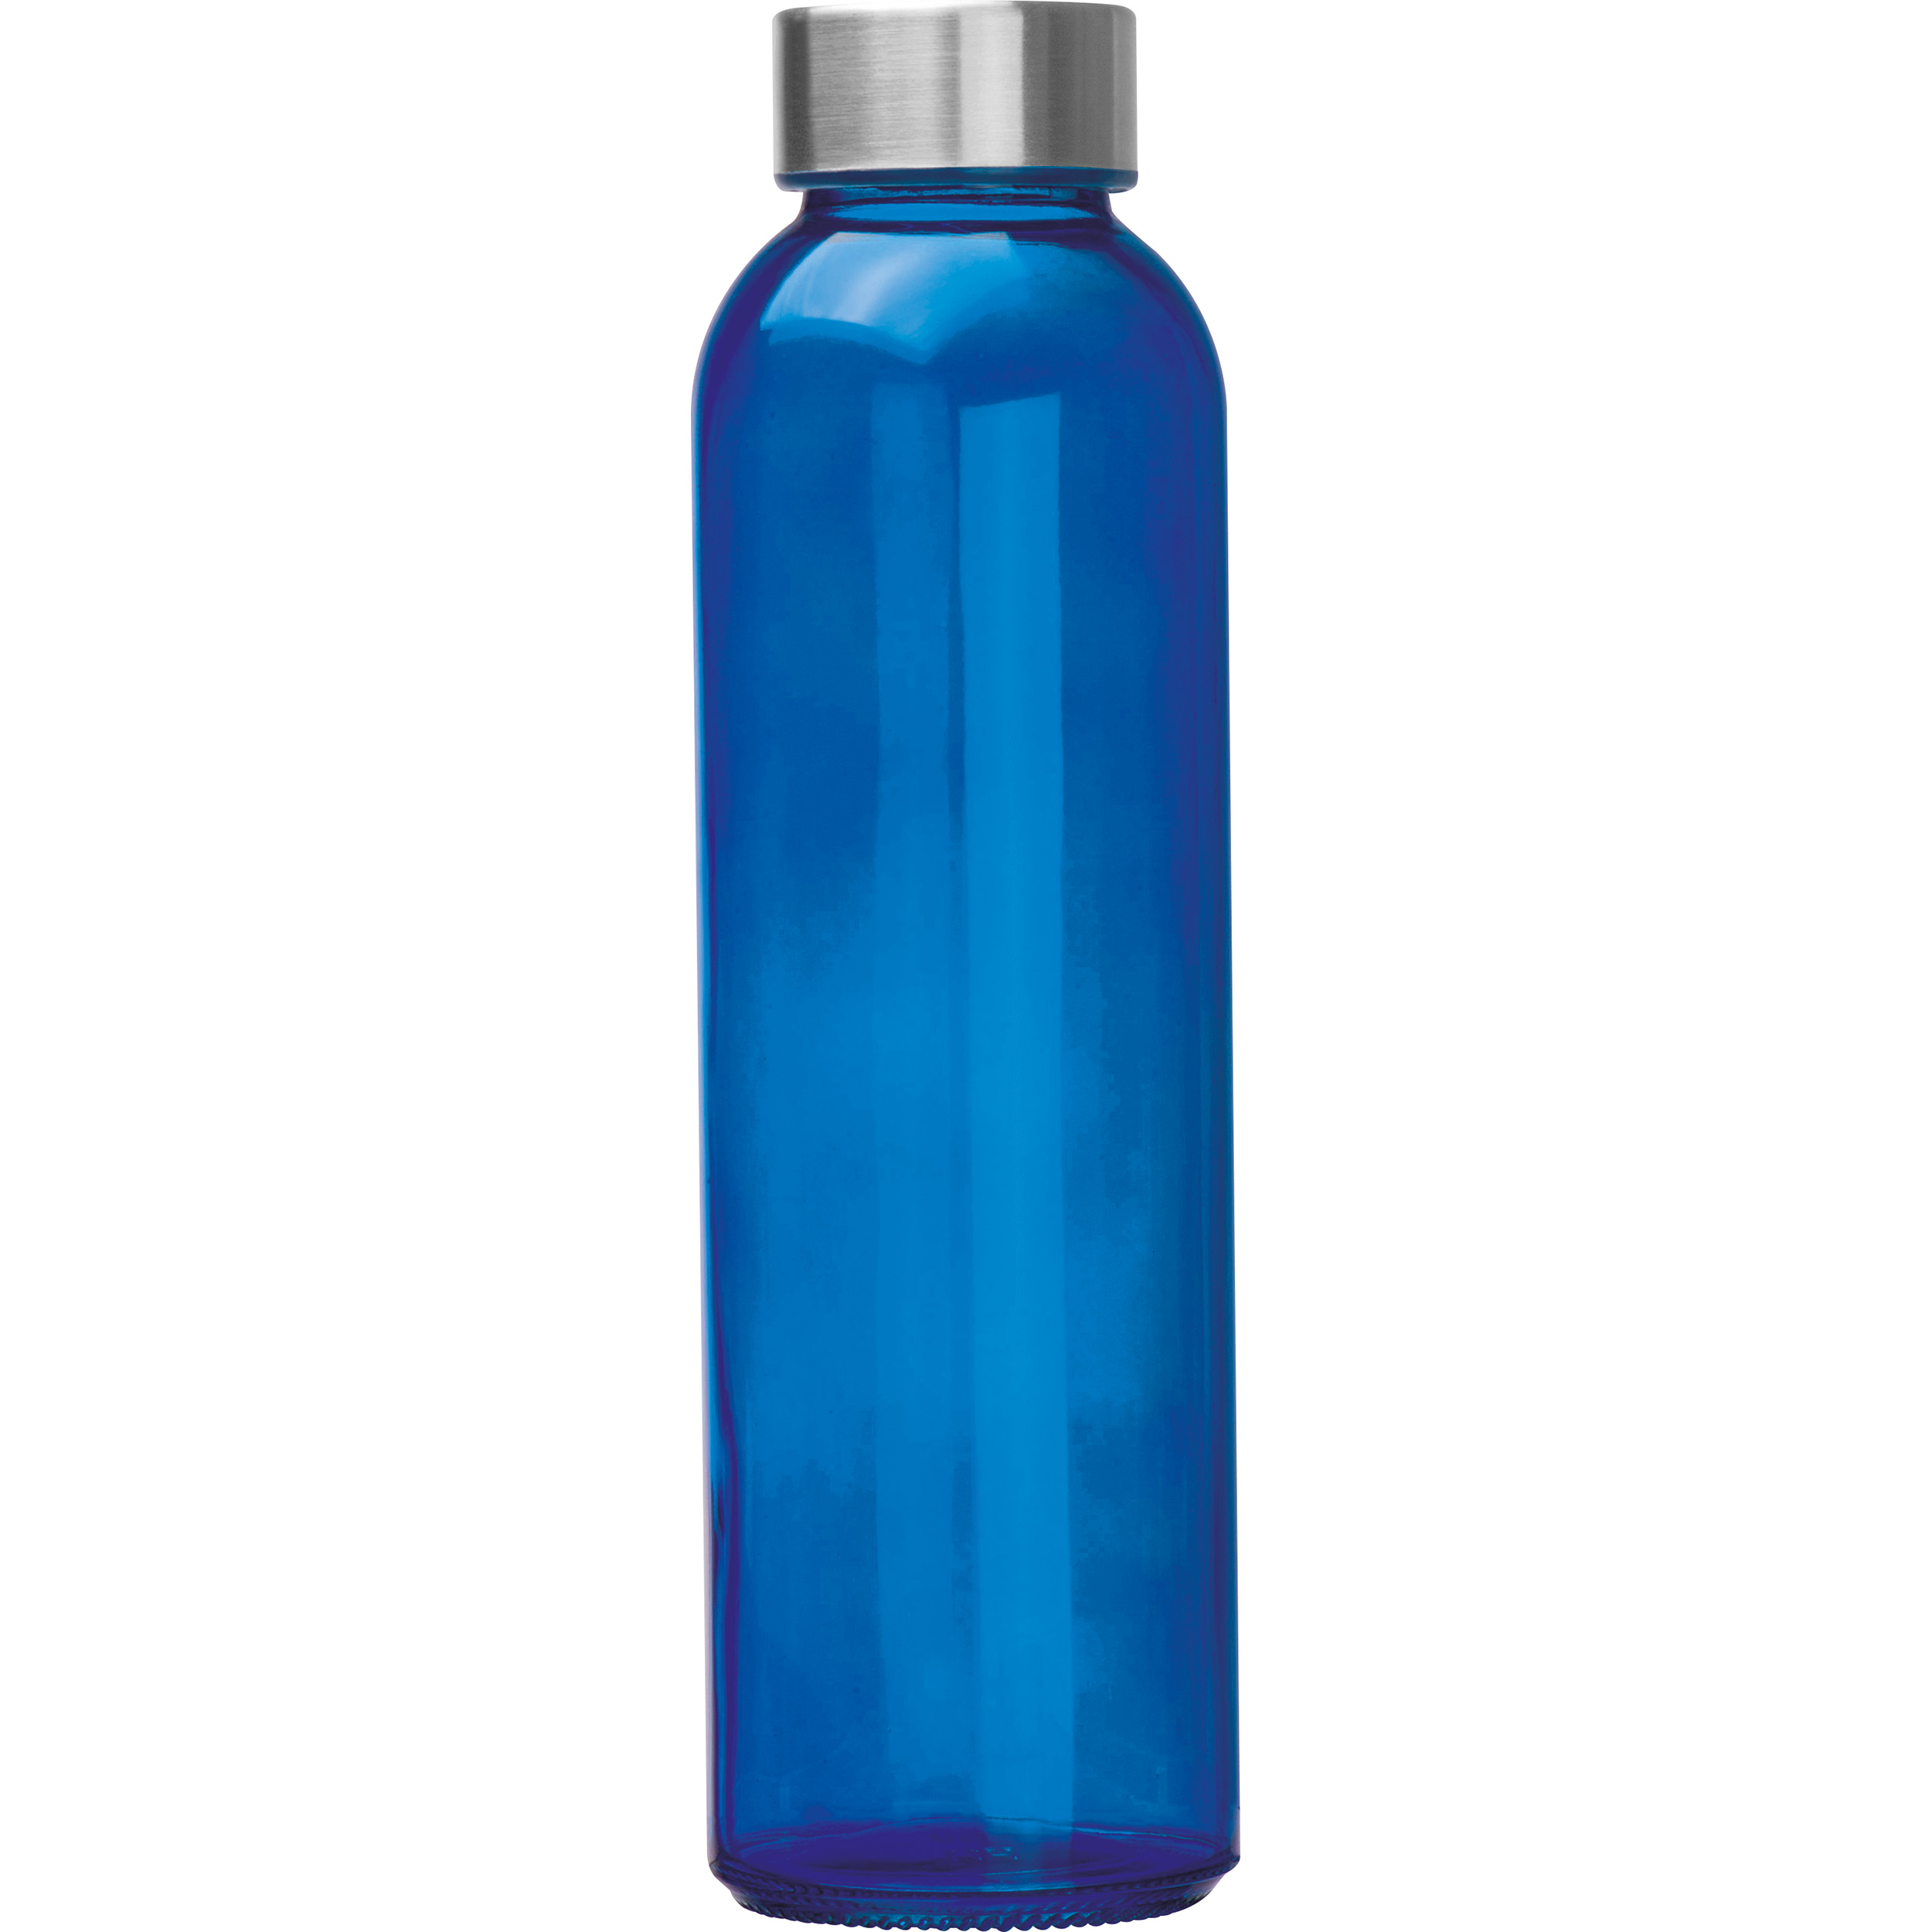 Transparent drinking bottle with grey lid